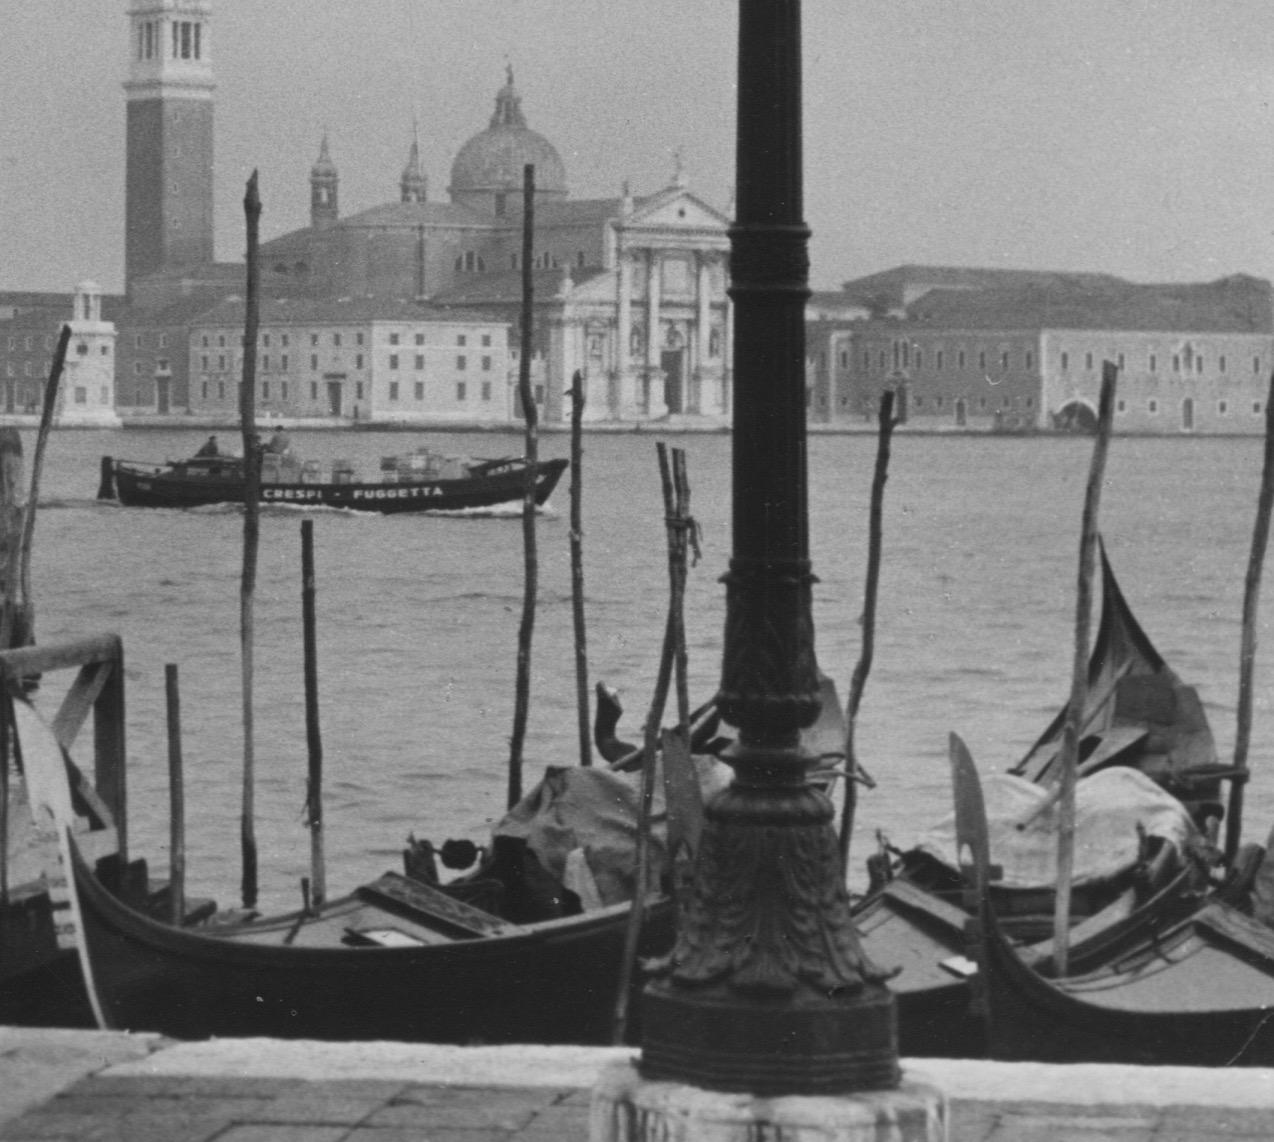 Andres: Venice - Gondolas with people, Italy, 1955 - Modern Photograph by Erich Andres